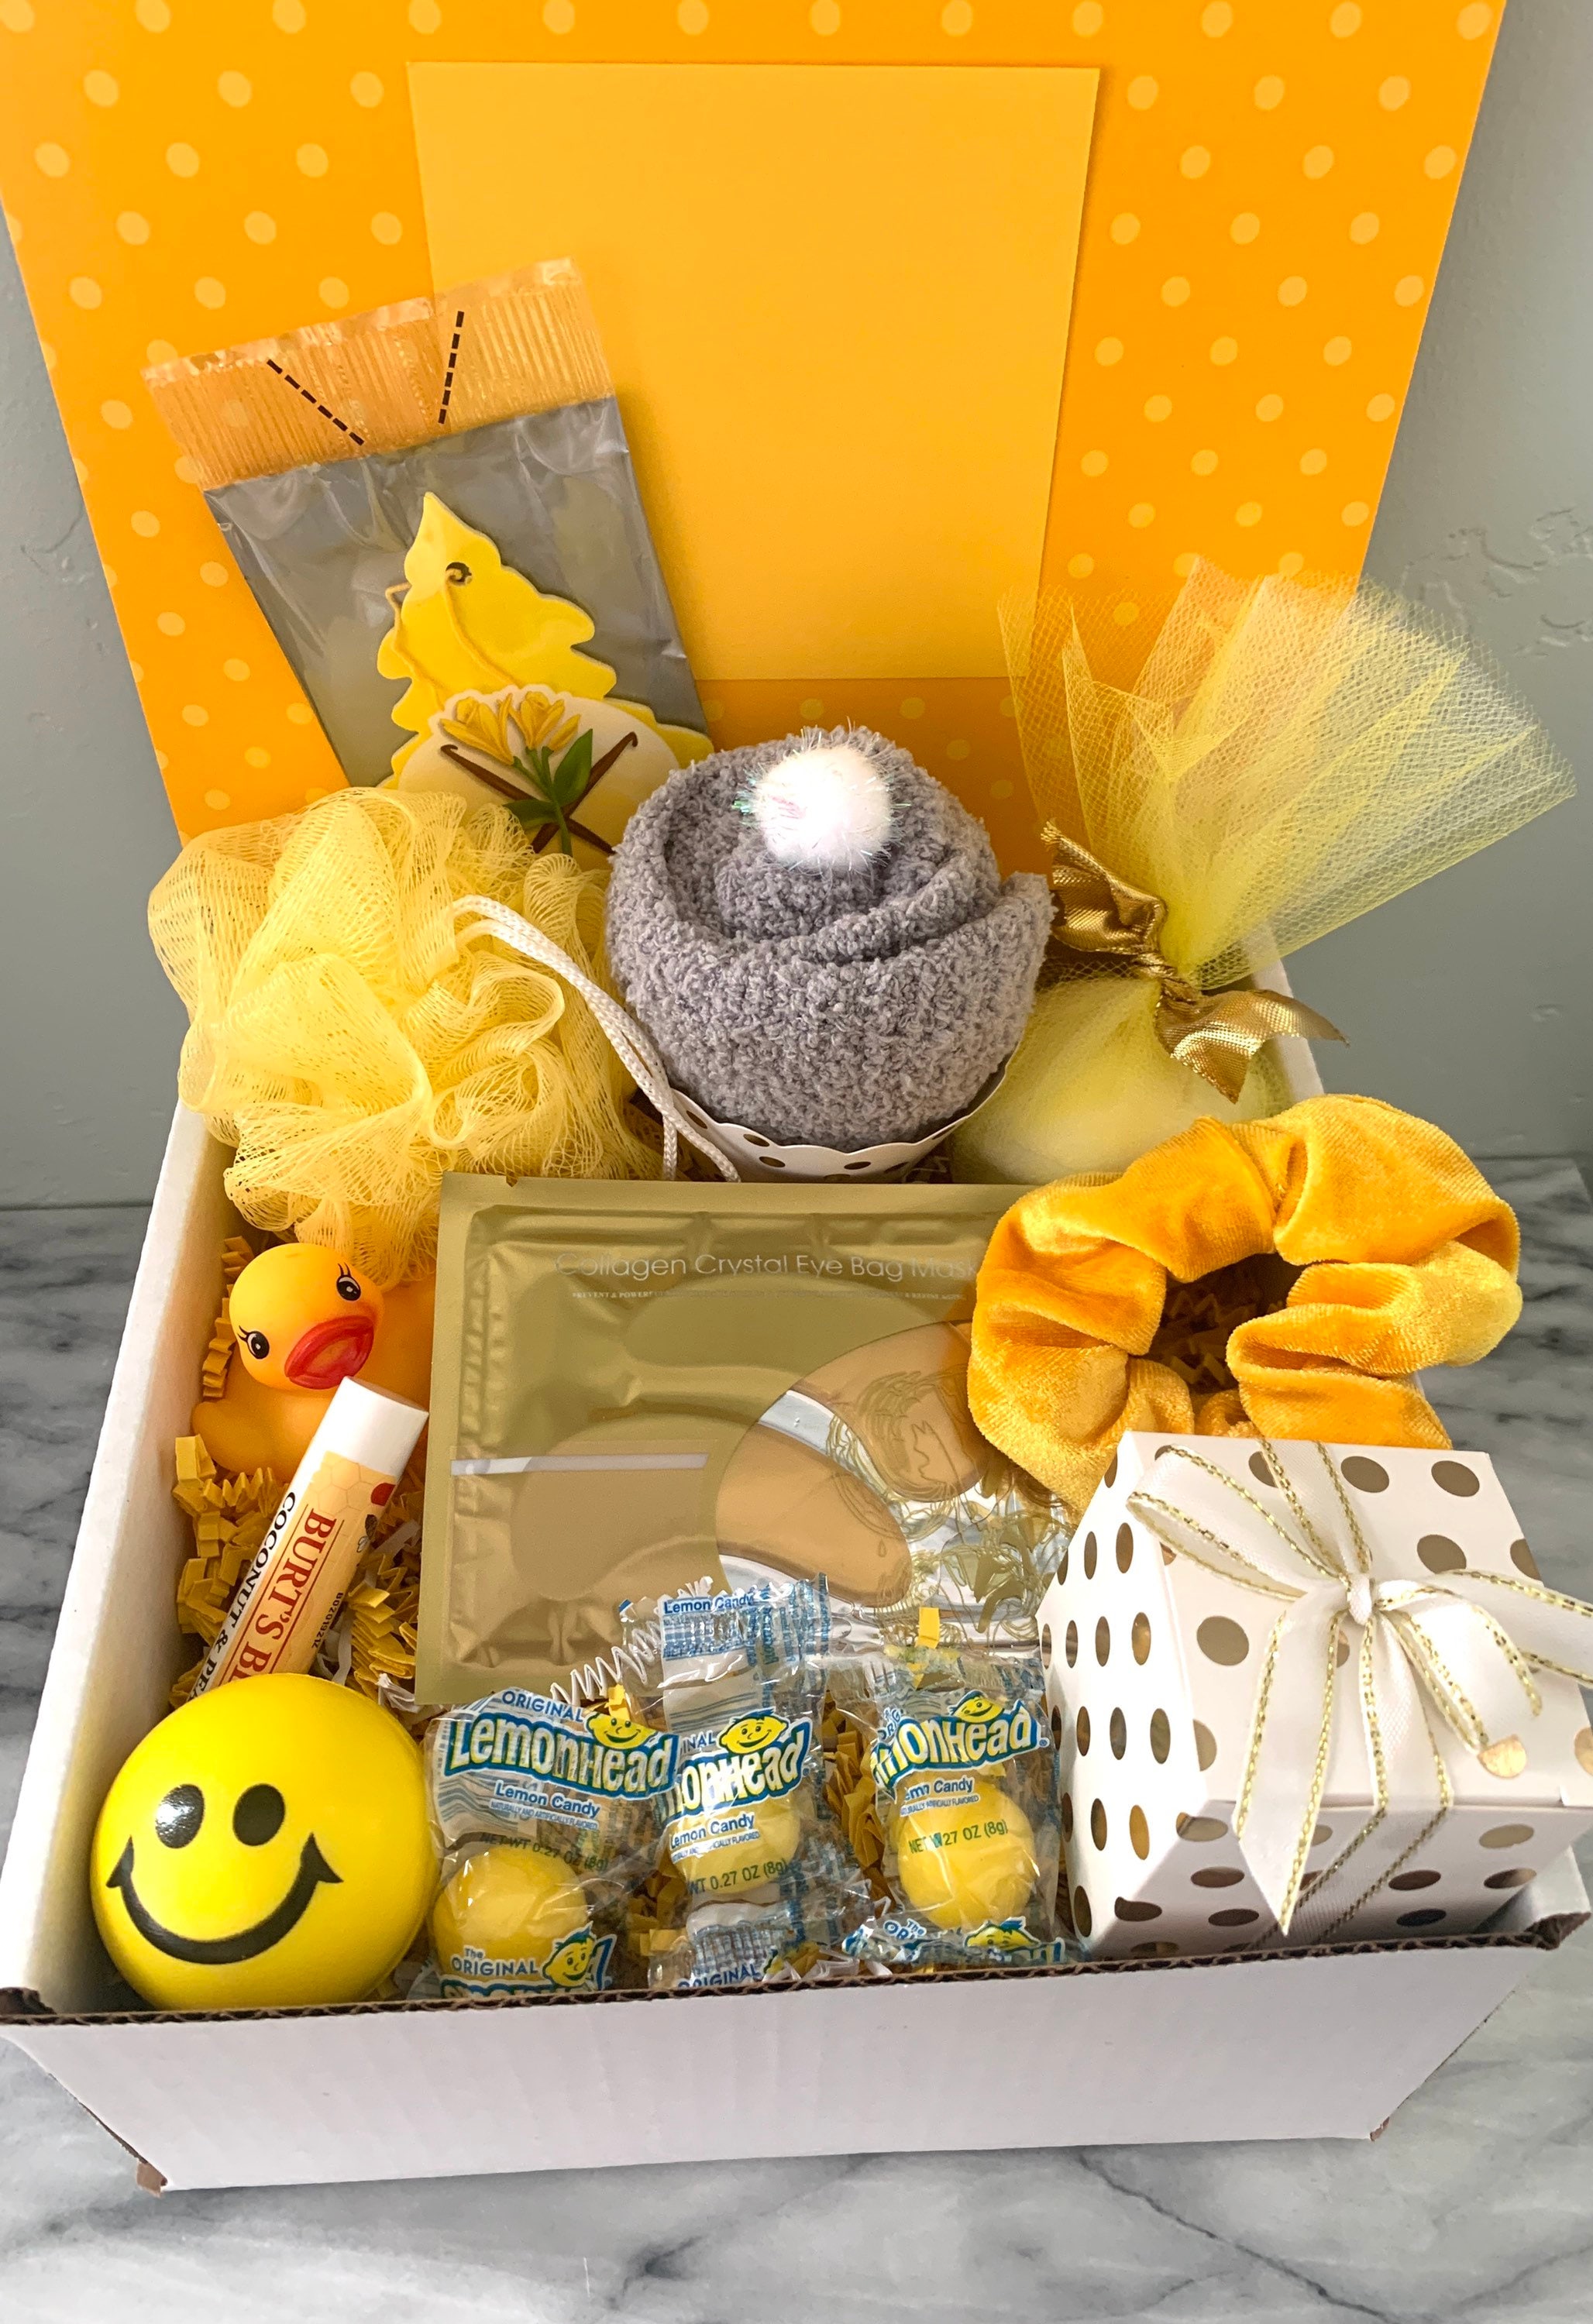 Birthday Gifts for Wome Sunshine Gifts Baskets Valentines Day Gifts for  Friends Female Self Care Package Thinking of You Gift Box for Her Sunflower